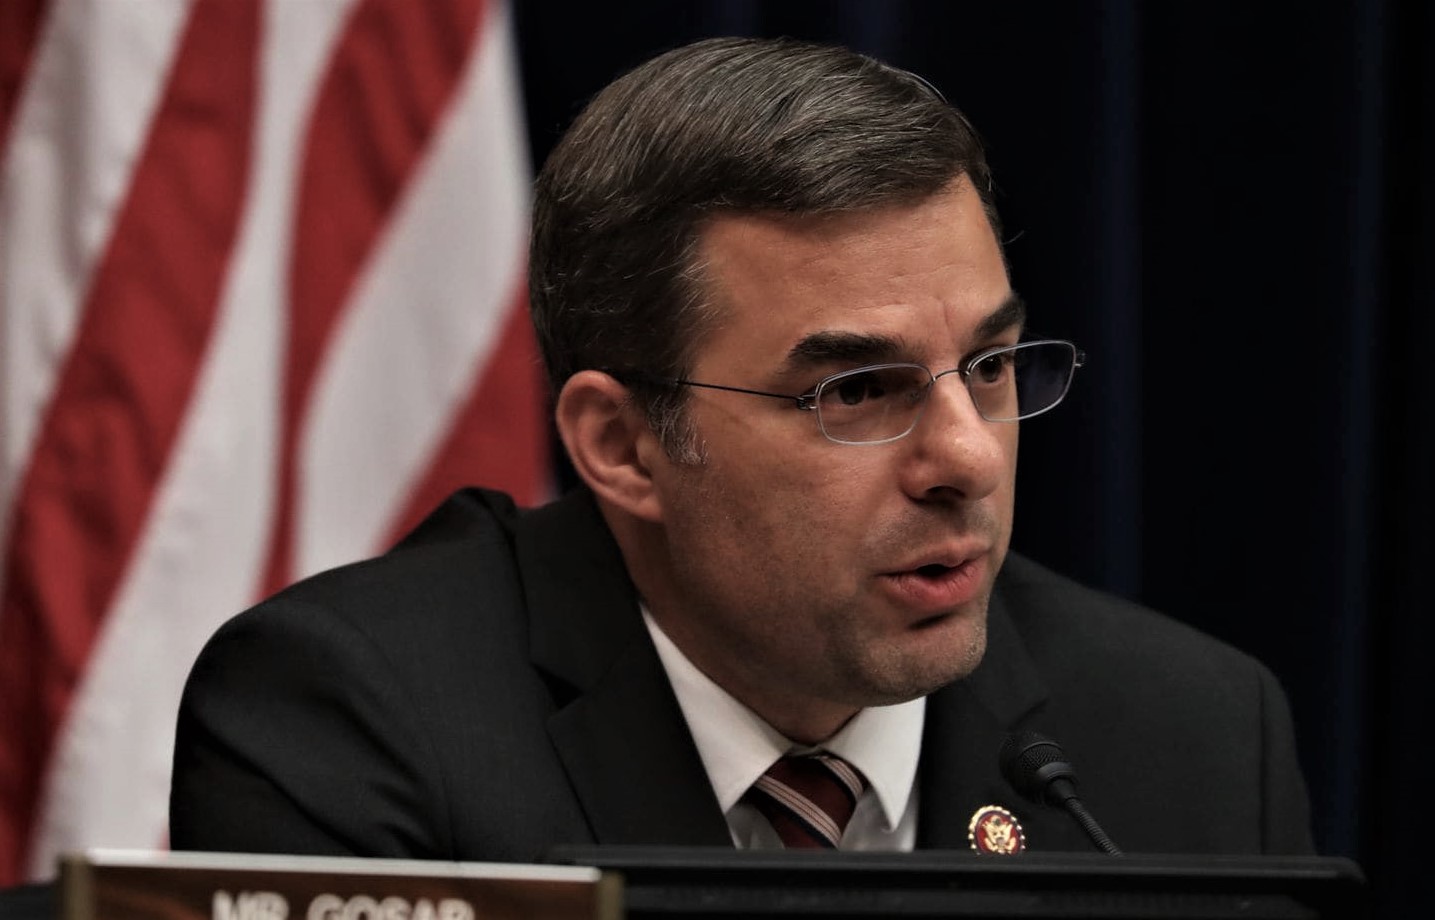 Featured image for “We Need More Leaders Like Justin Amash”